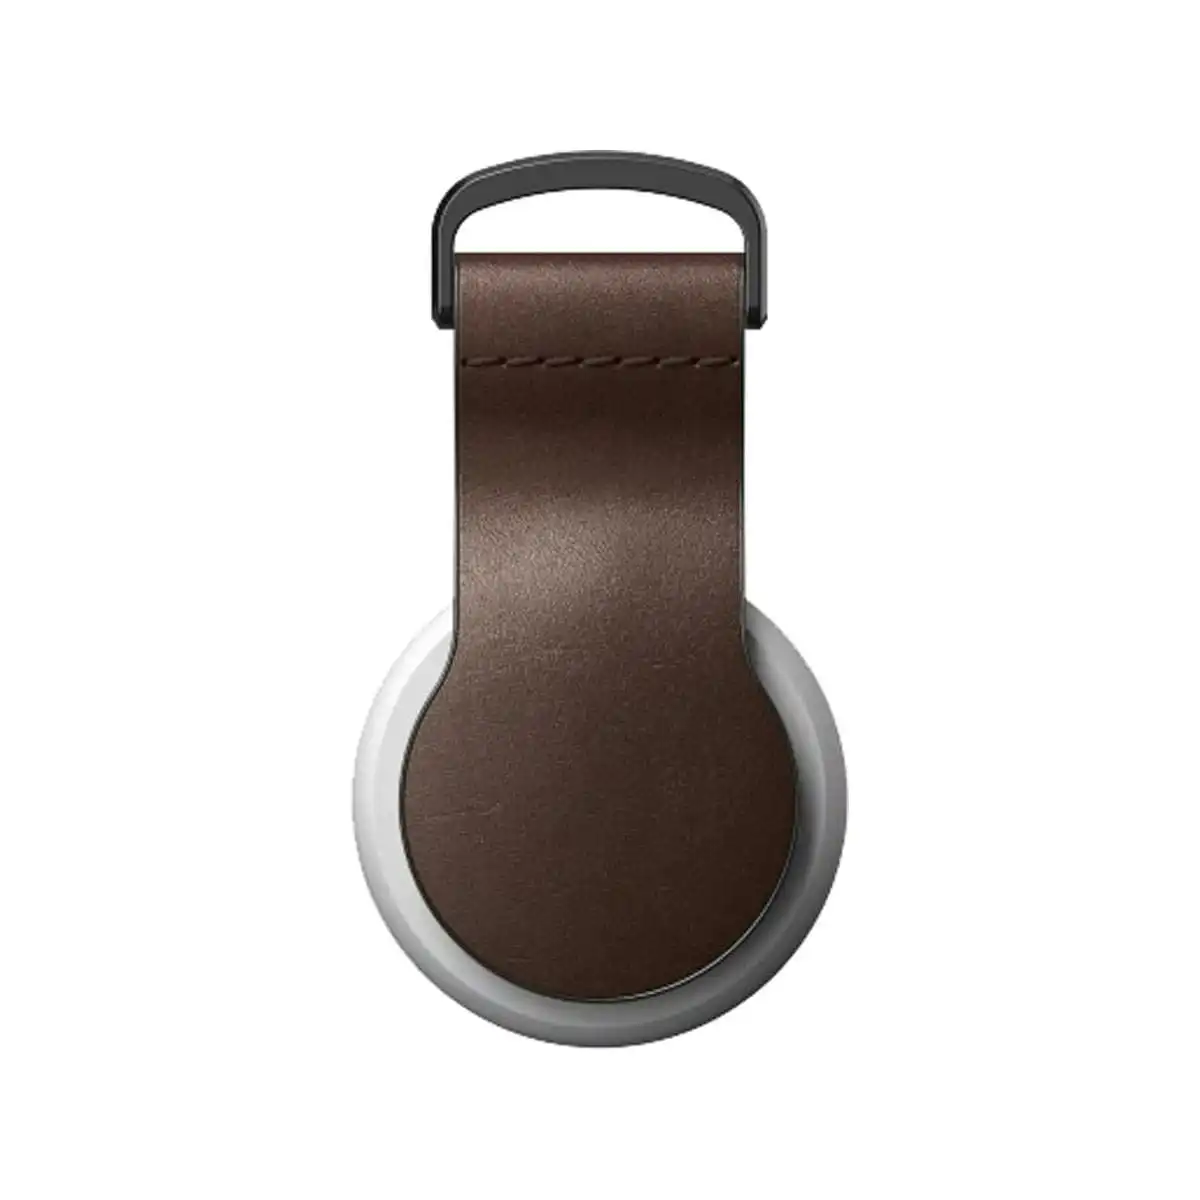 Nomad Leather Loop for AirTag - Rustic Brown Horween Leather